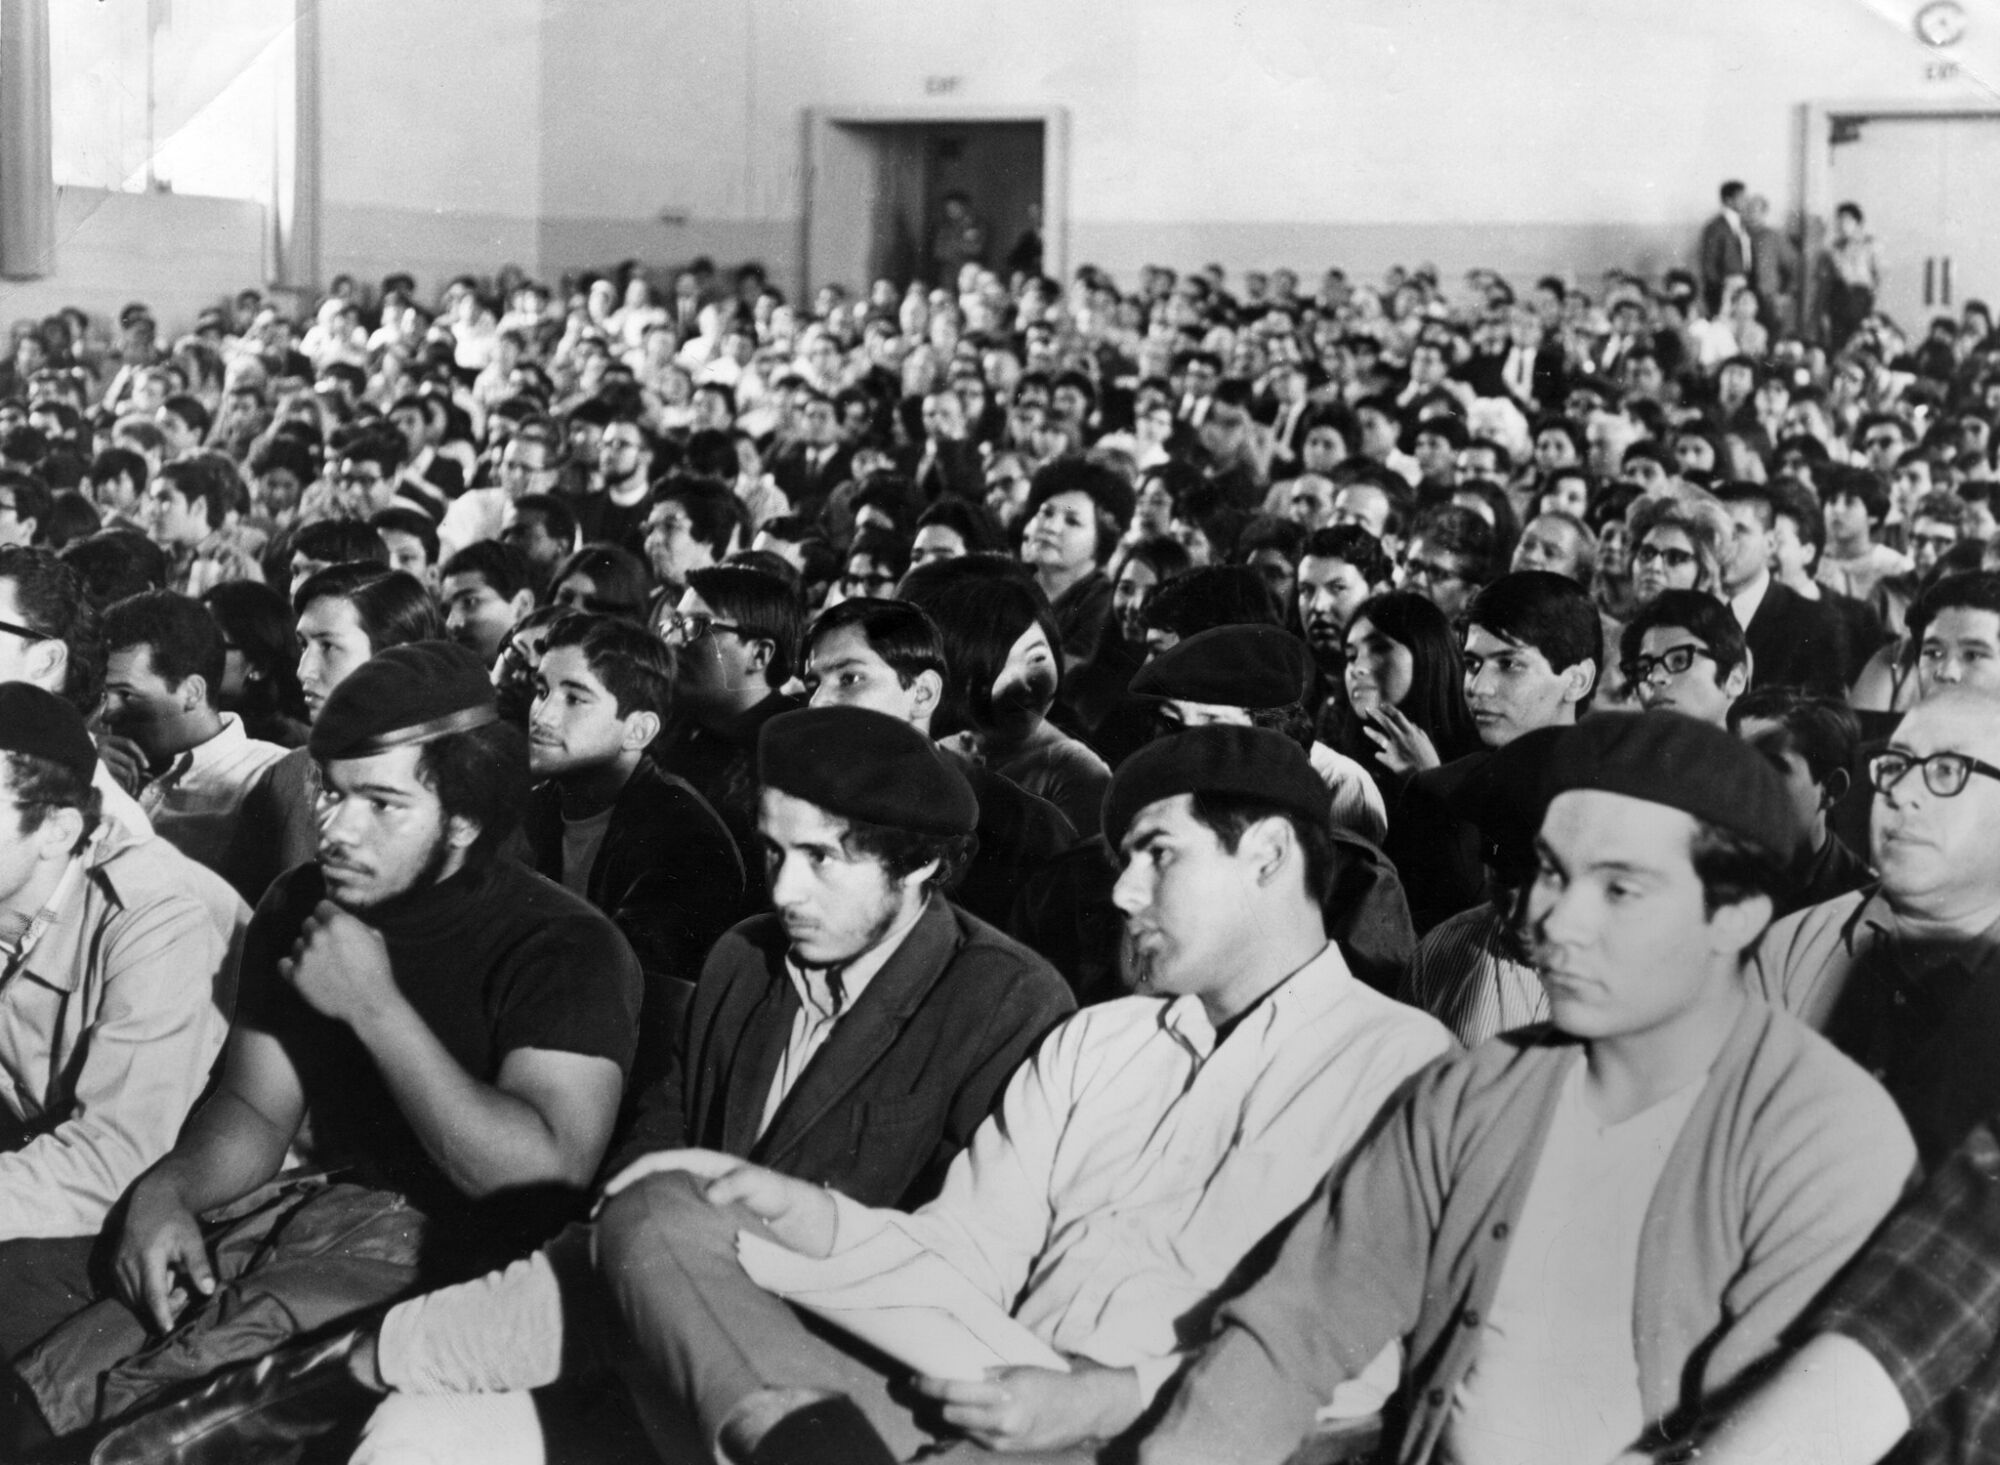 Members of the Brown Berets listen to a speaker on June 9, 1968, in a crowded auditorium